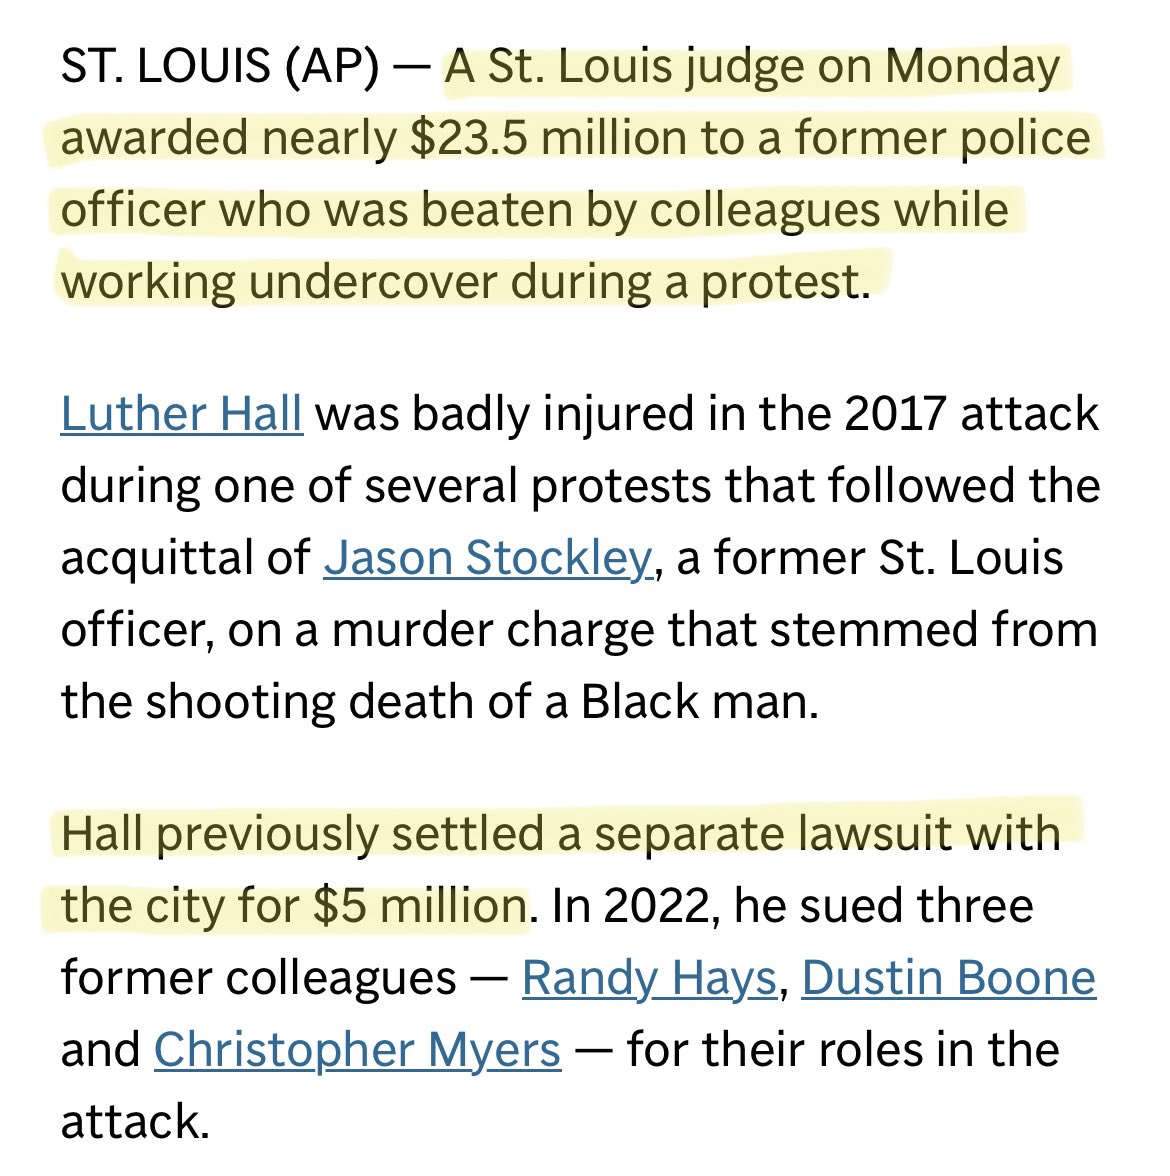 A police officer in Missouri was awarded over $23 million after he was assaulted by his own colleagues while working undercover at a protest. He previously settled another lawsuit with the city of St. Louis for $5 million. apnews.com/article/st-lou…